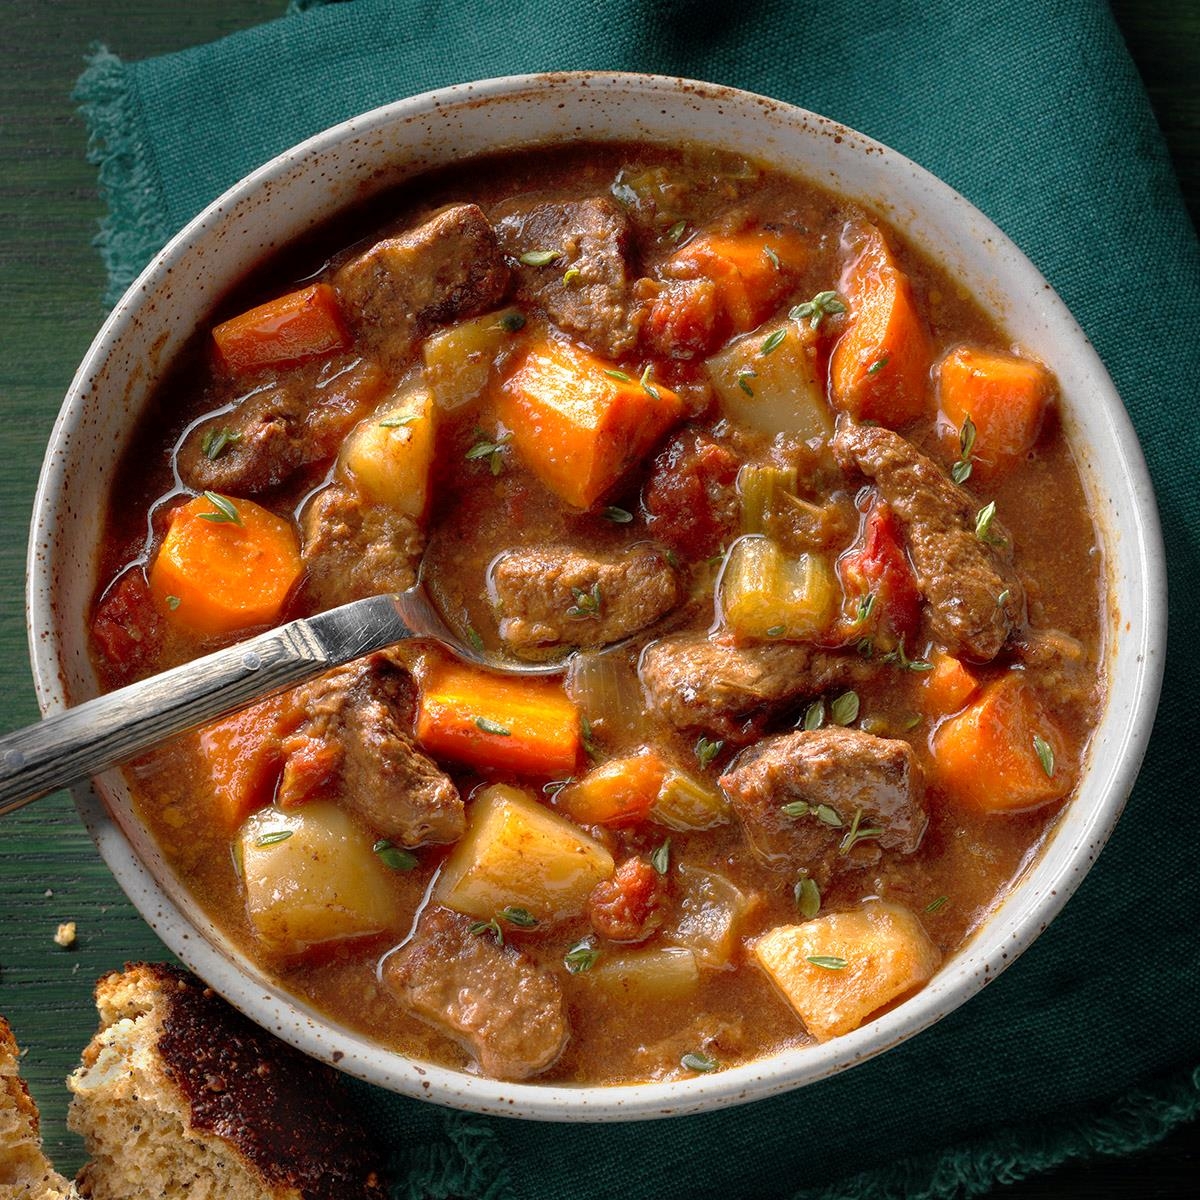 8 Images Beef Stew In Slow Cooker Recipe And Description - Alqu Blog